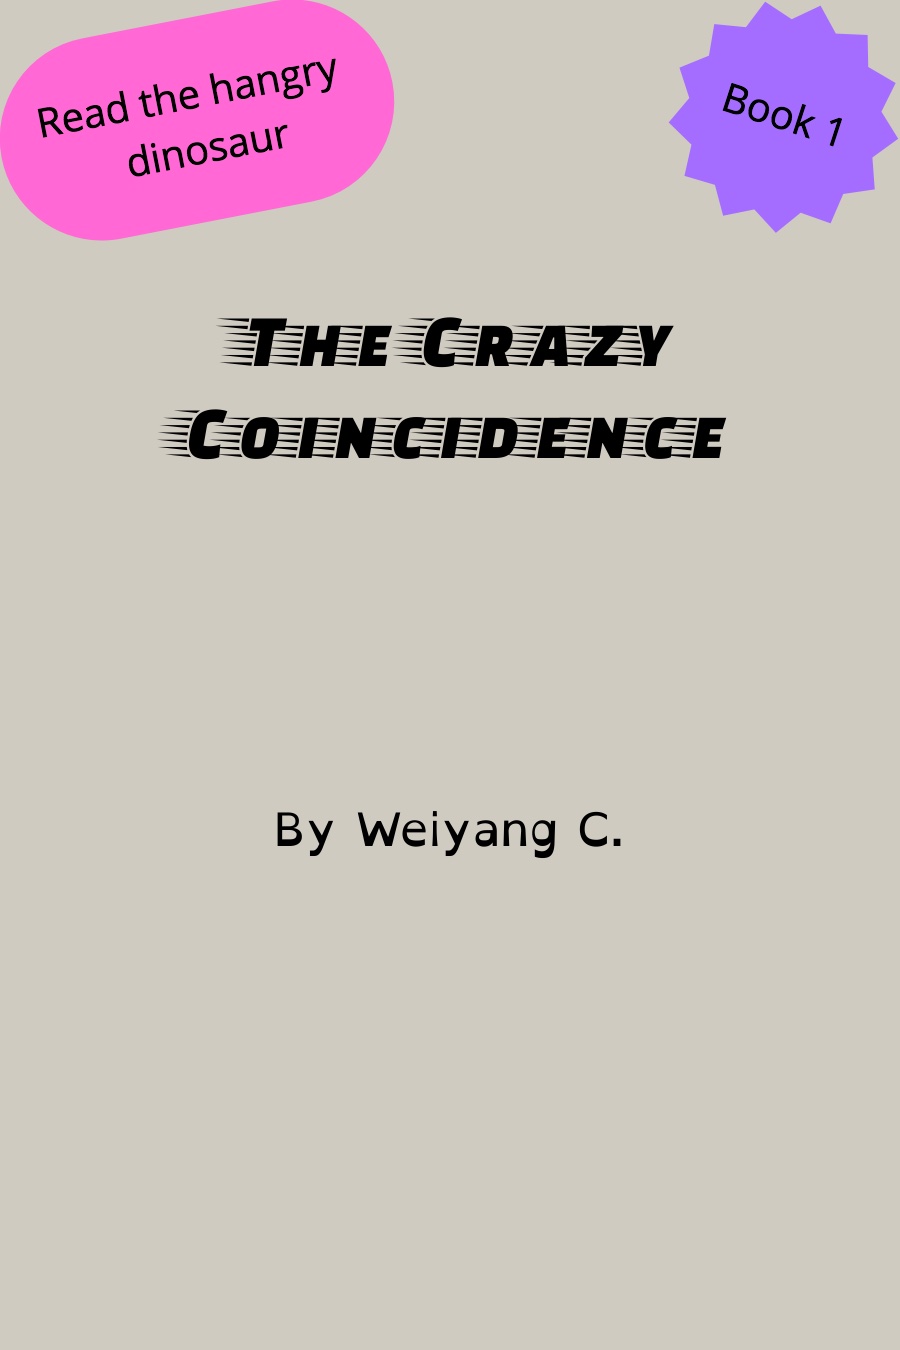 The Crazy Coincedence by Weiyang C